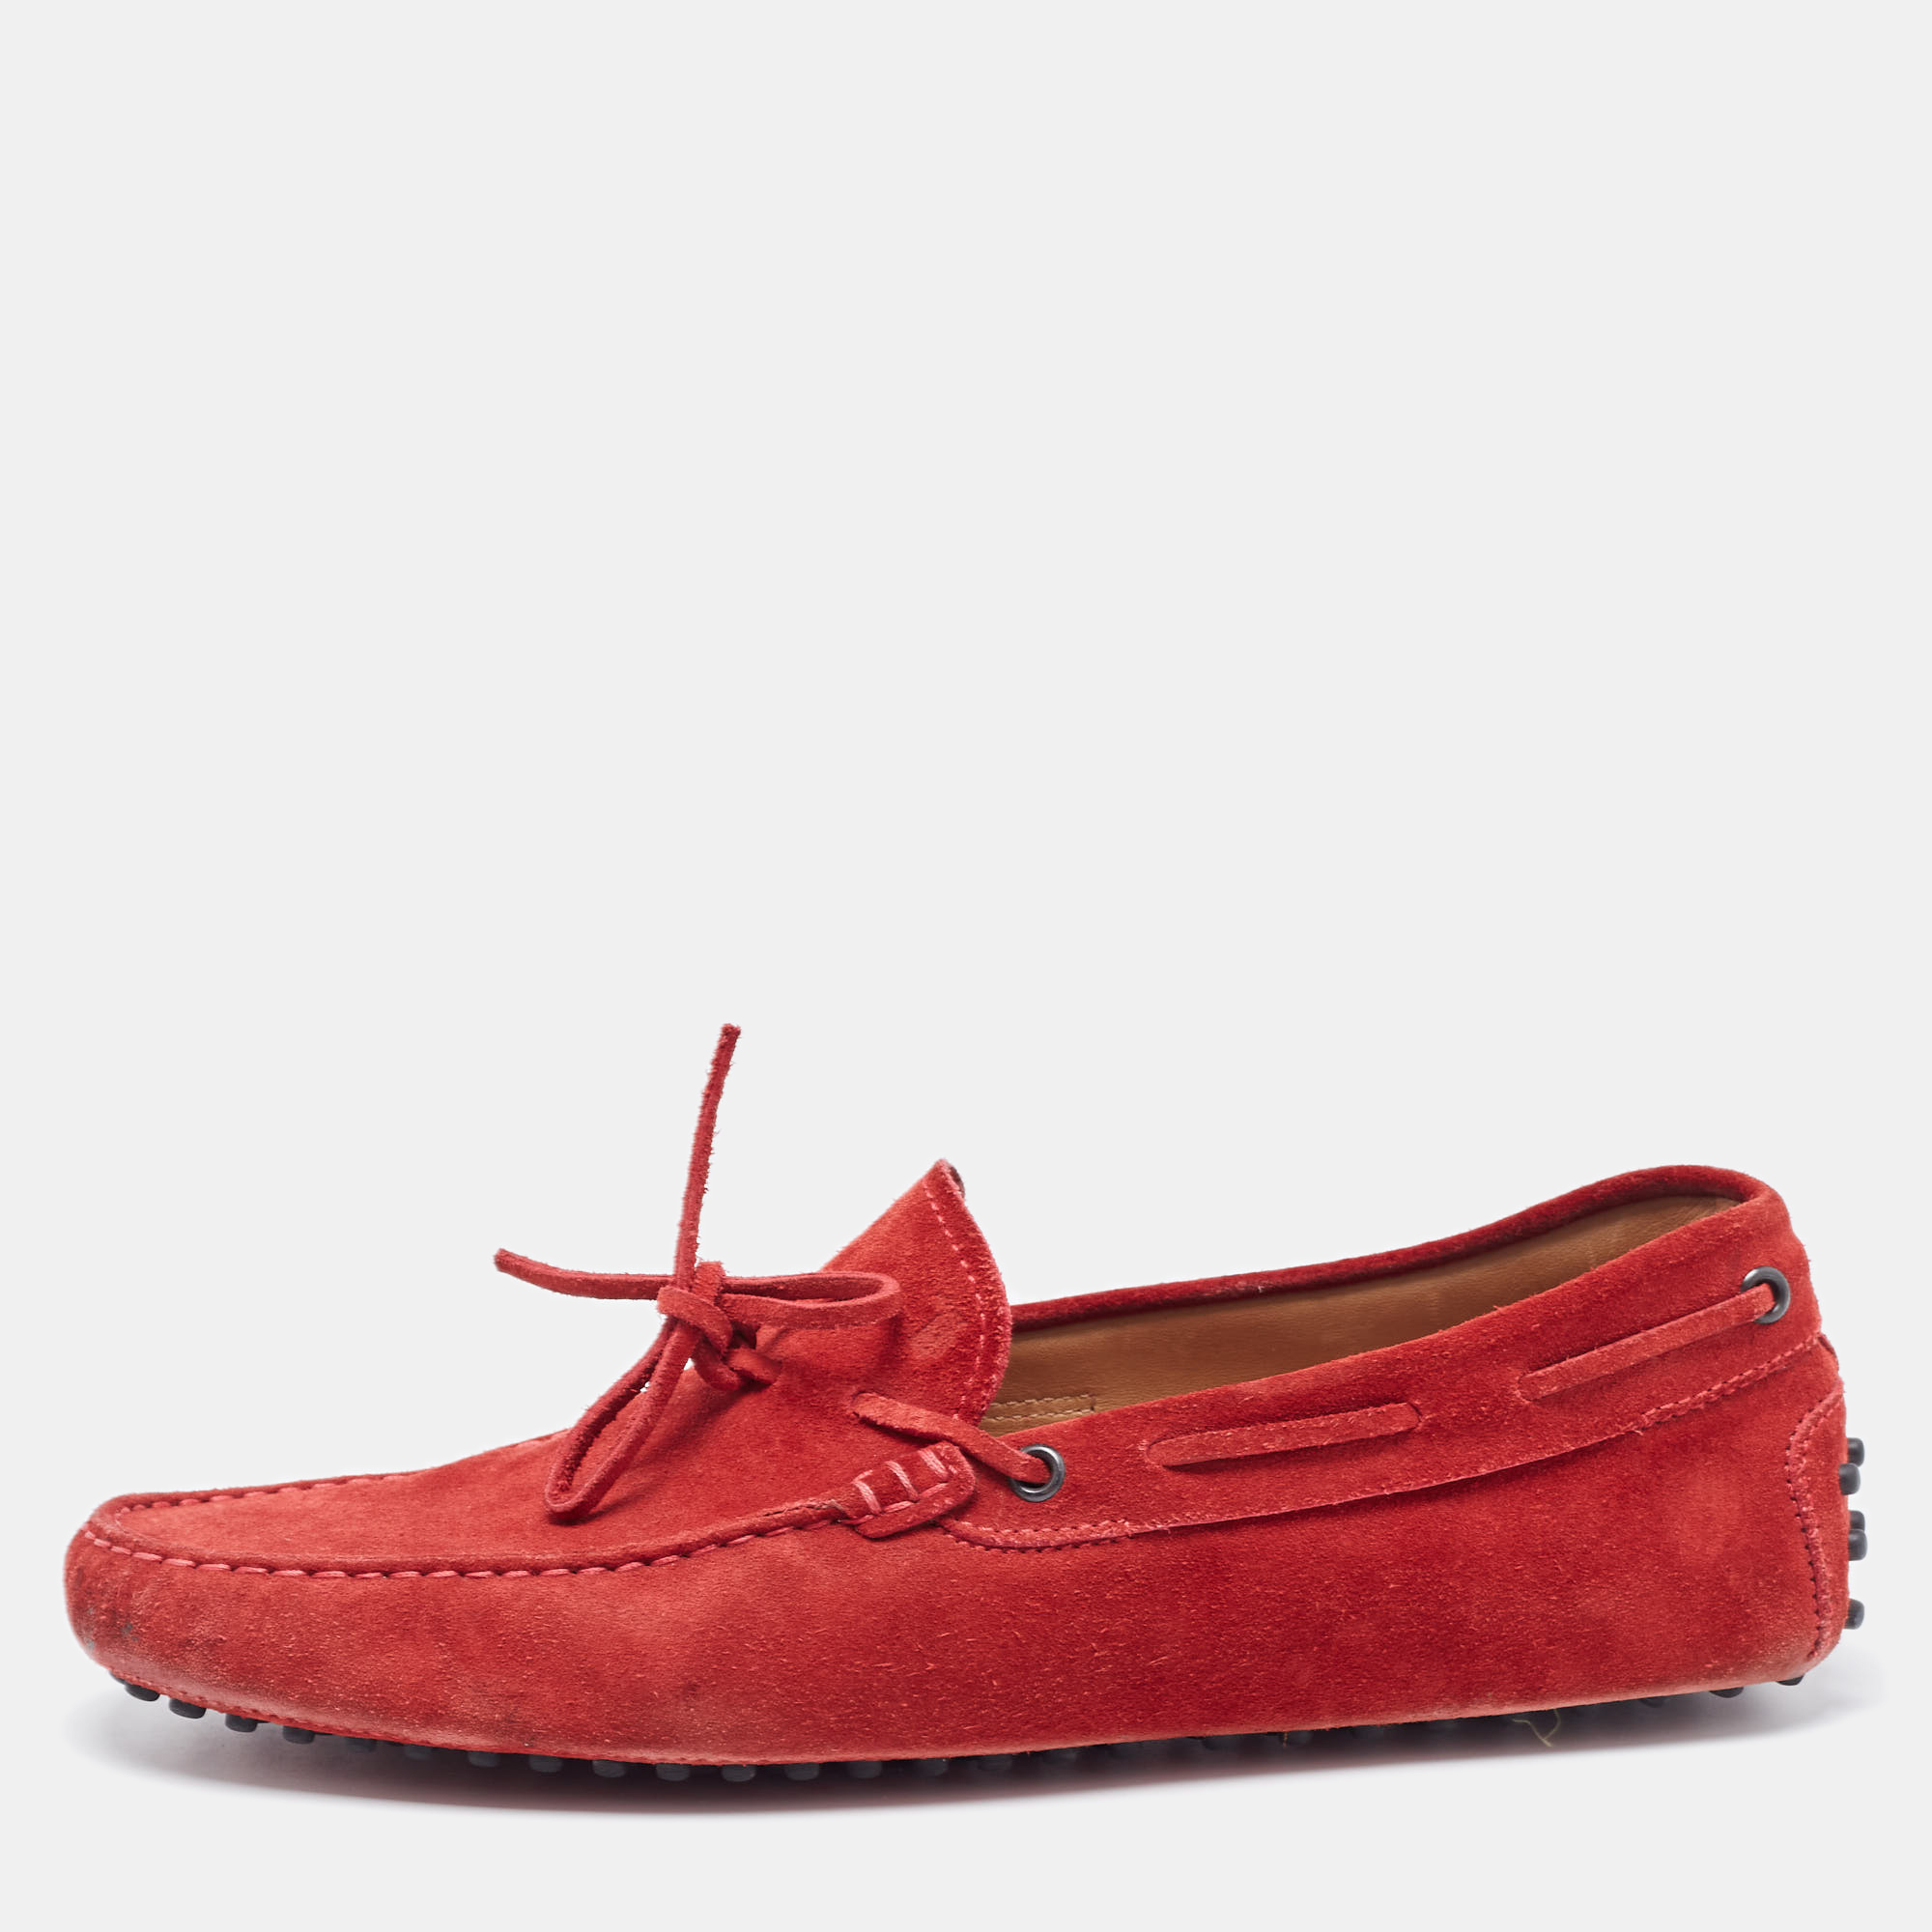 Tod's Red Suede Gommino Bow Driving Slip On Loafers Size 43